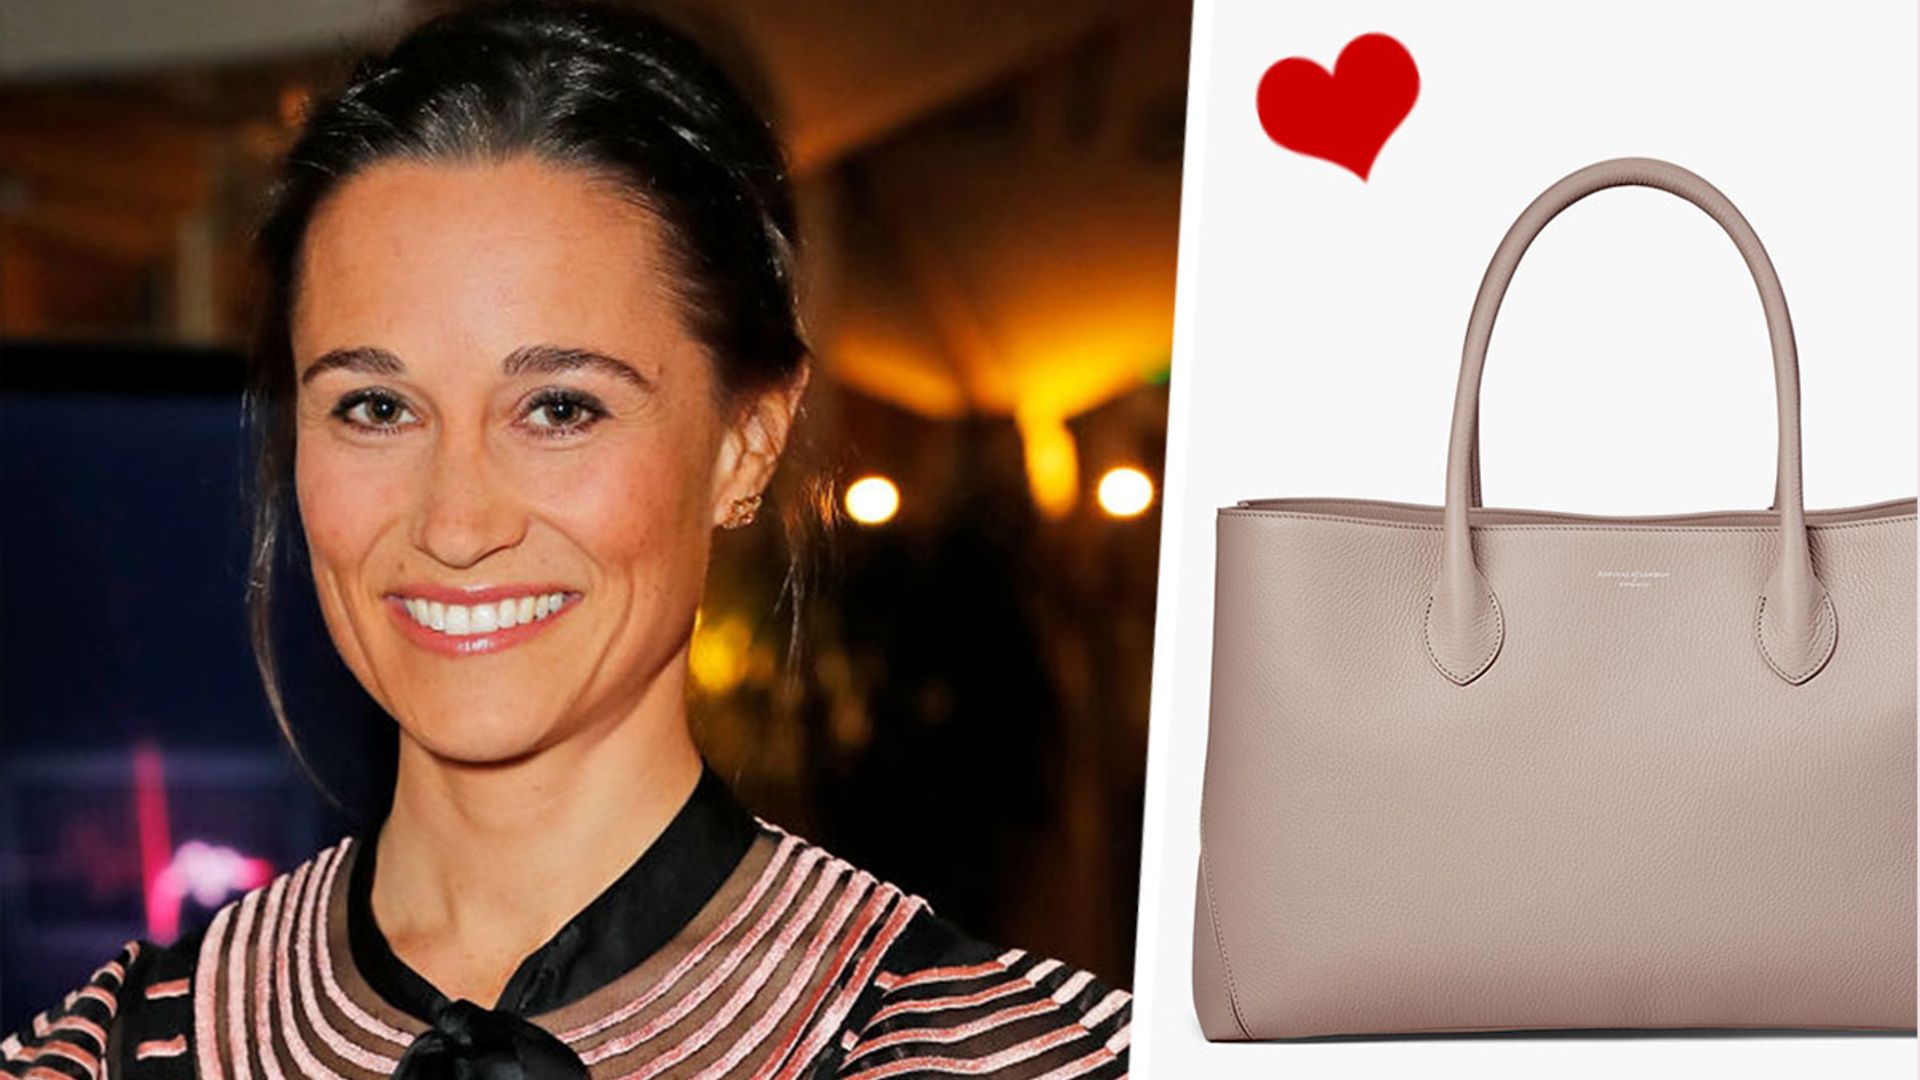 WHAT'S IN MY PIPPA BAG?